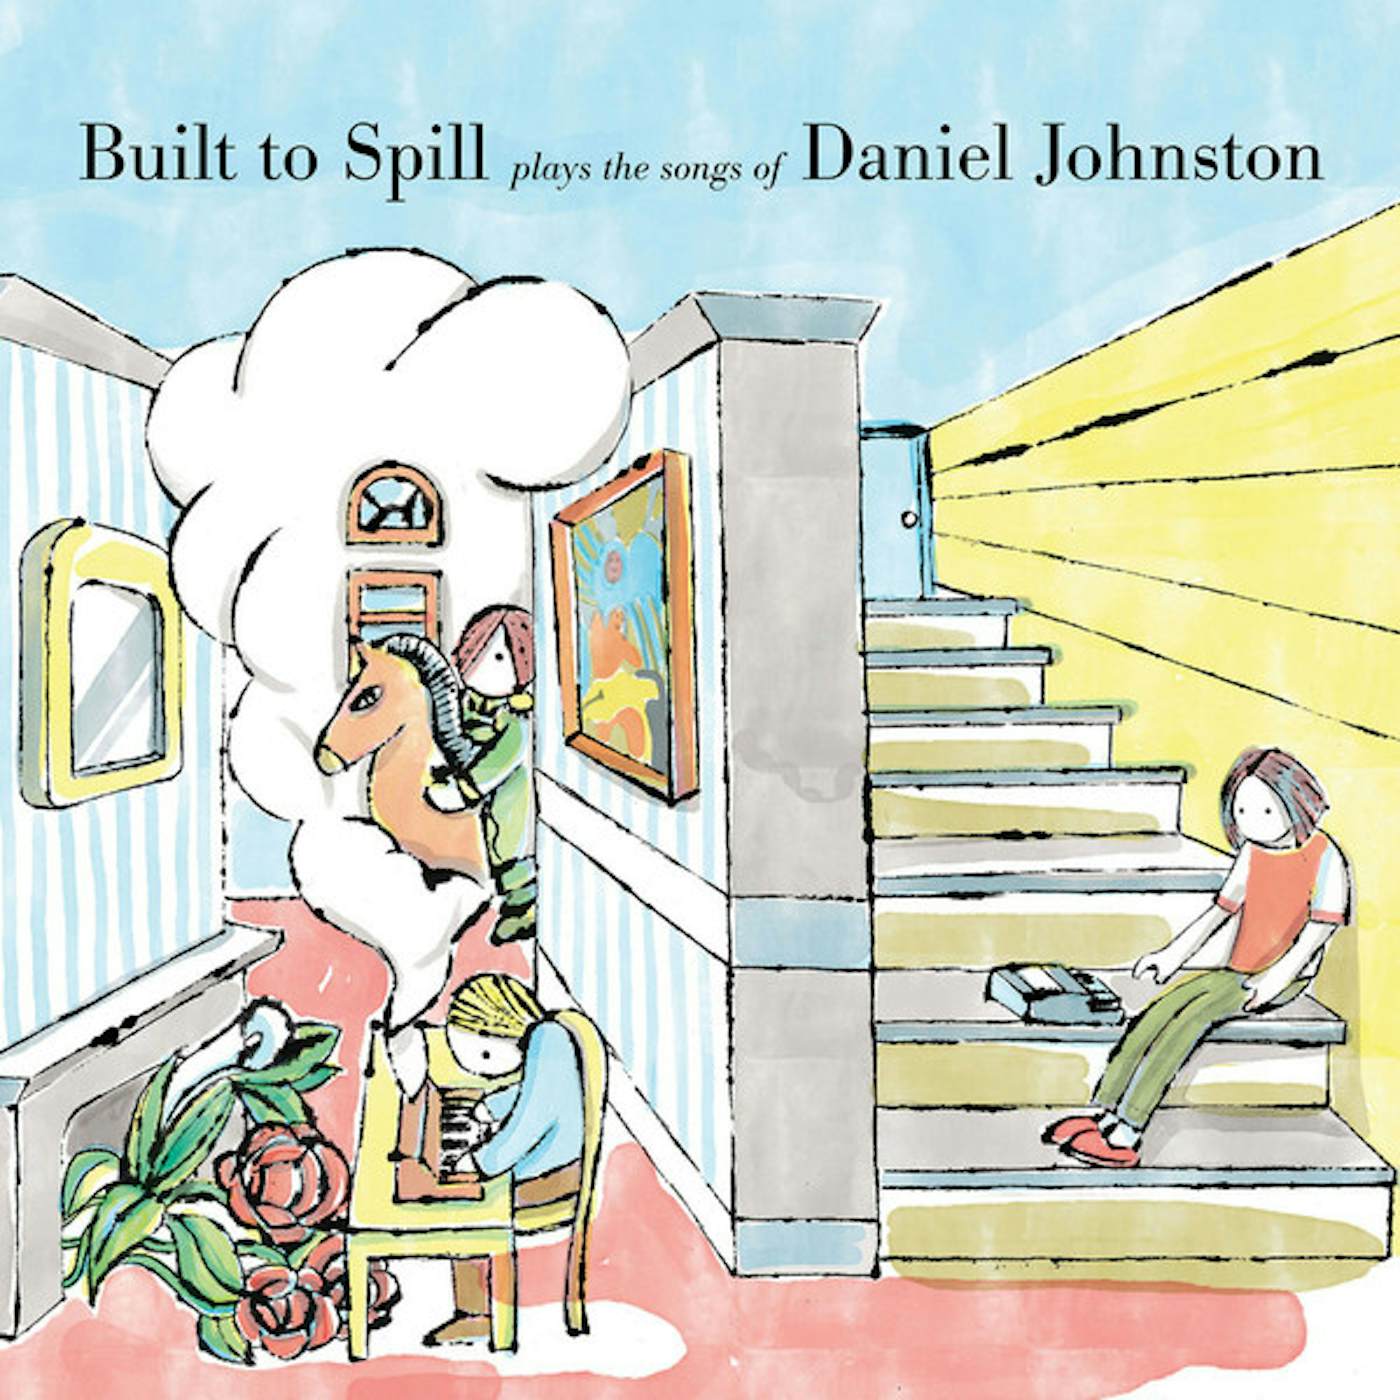 BUILT TO SPILL PLAYS THE SONGS OF DANIEL JOHNSTON Vinyl Record